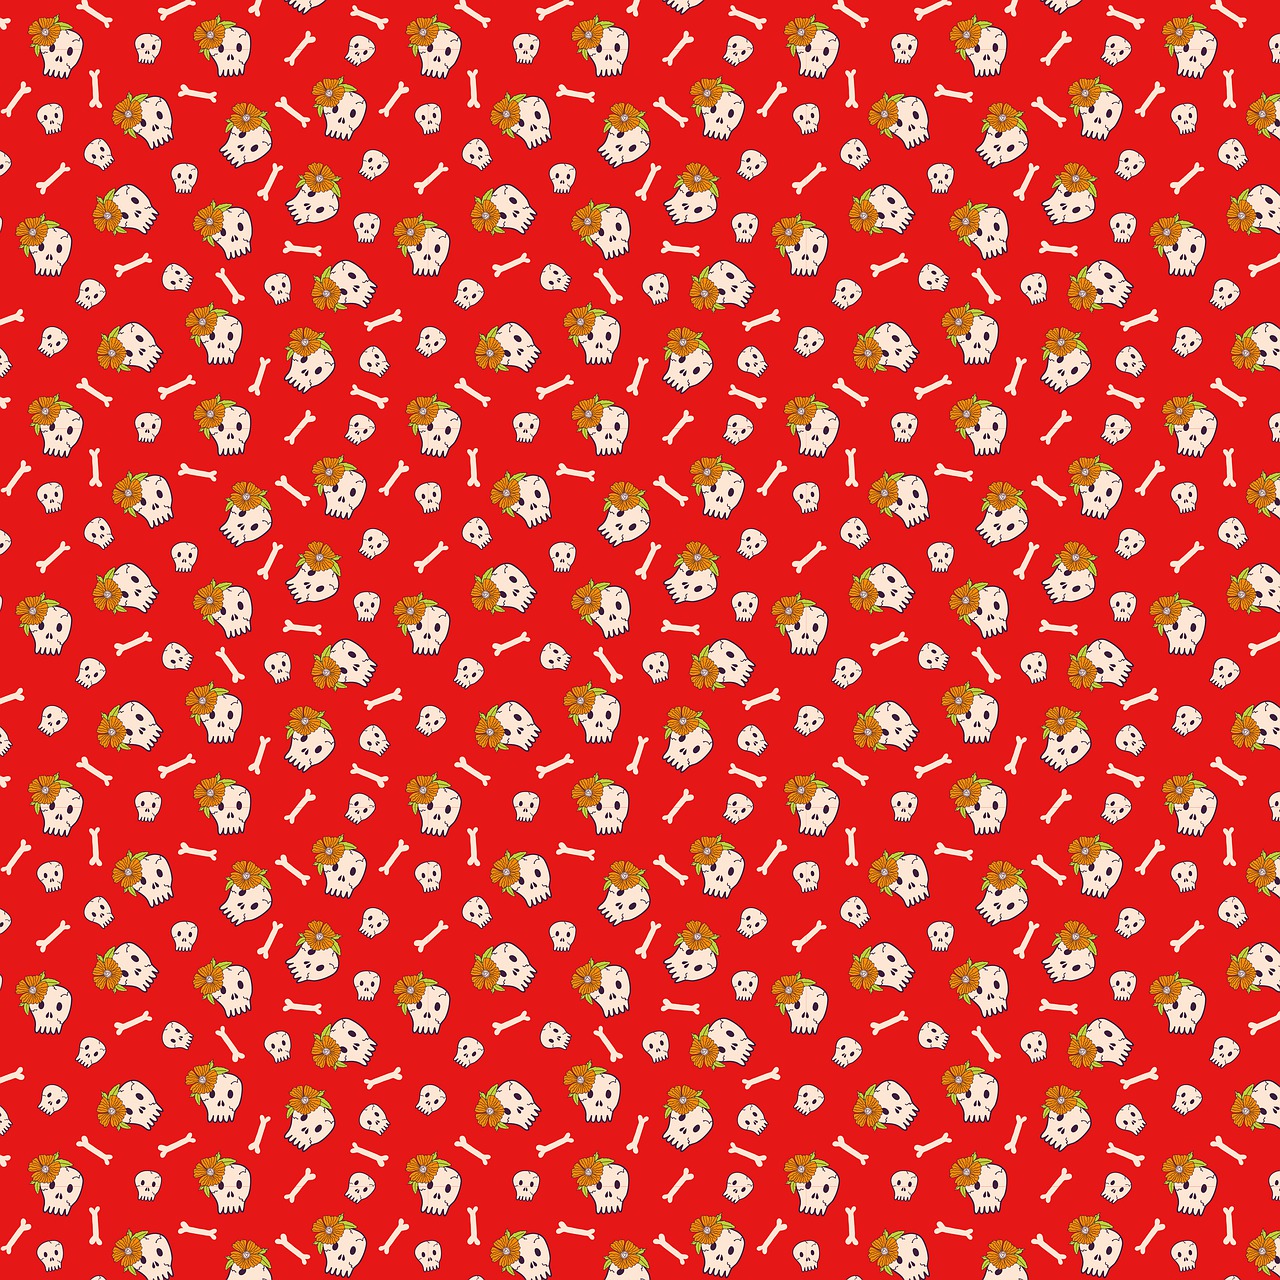 a pattern of skulls and bones on a red background, inspired by Saitō Kiyoshi, cute corgi, the sims 4 texture, red and golden color details, bozo the clown. clown motif